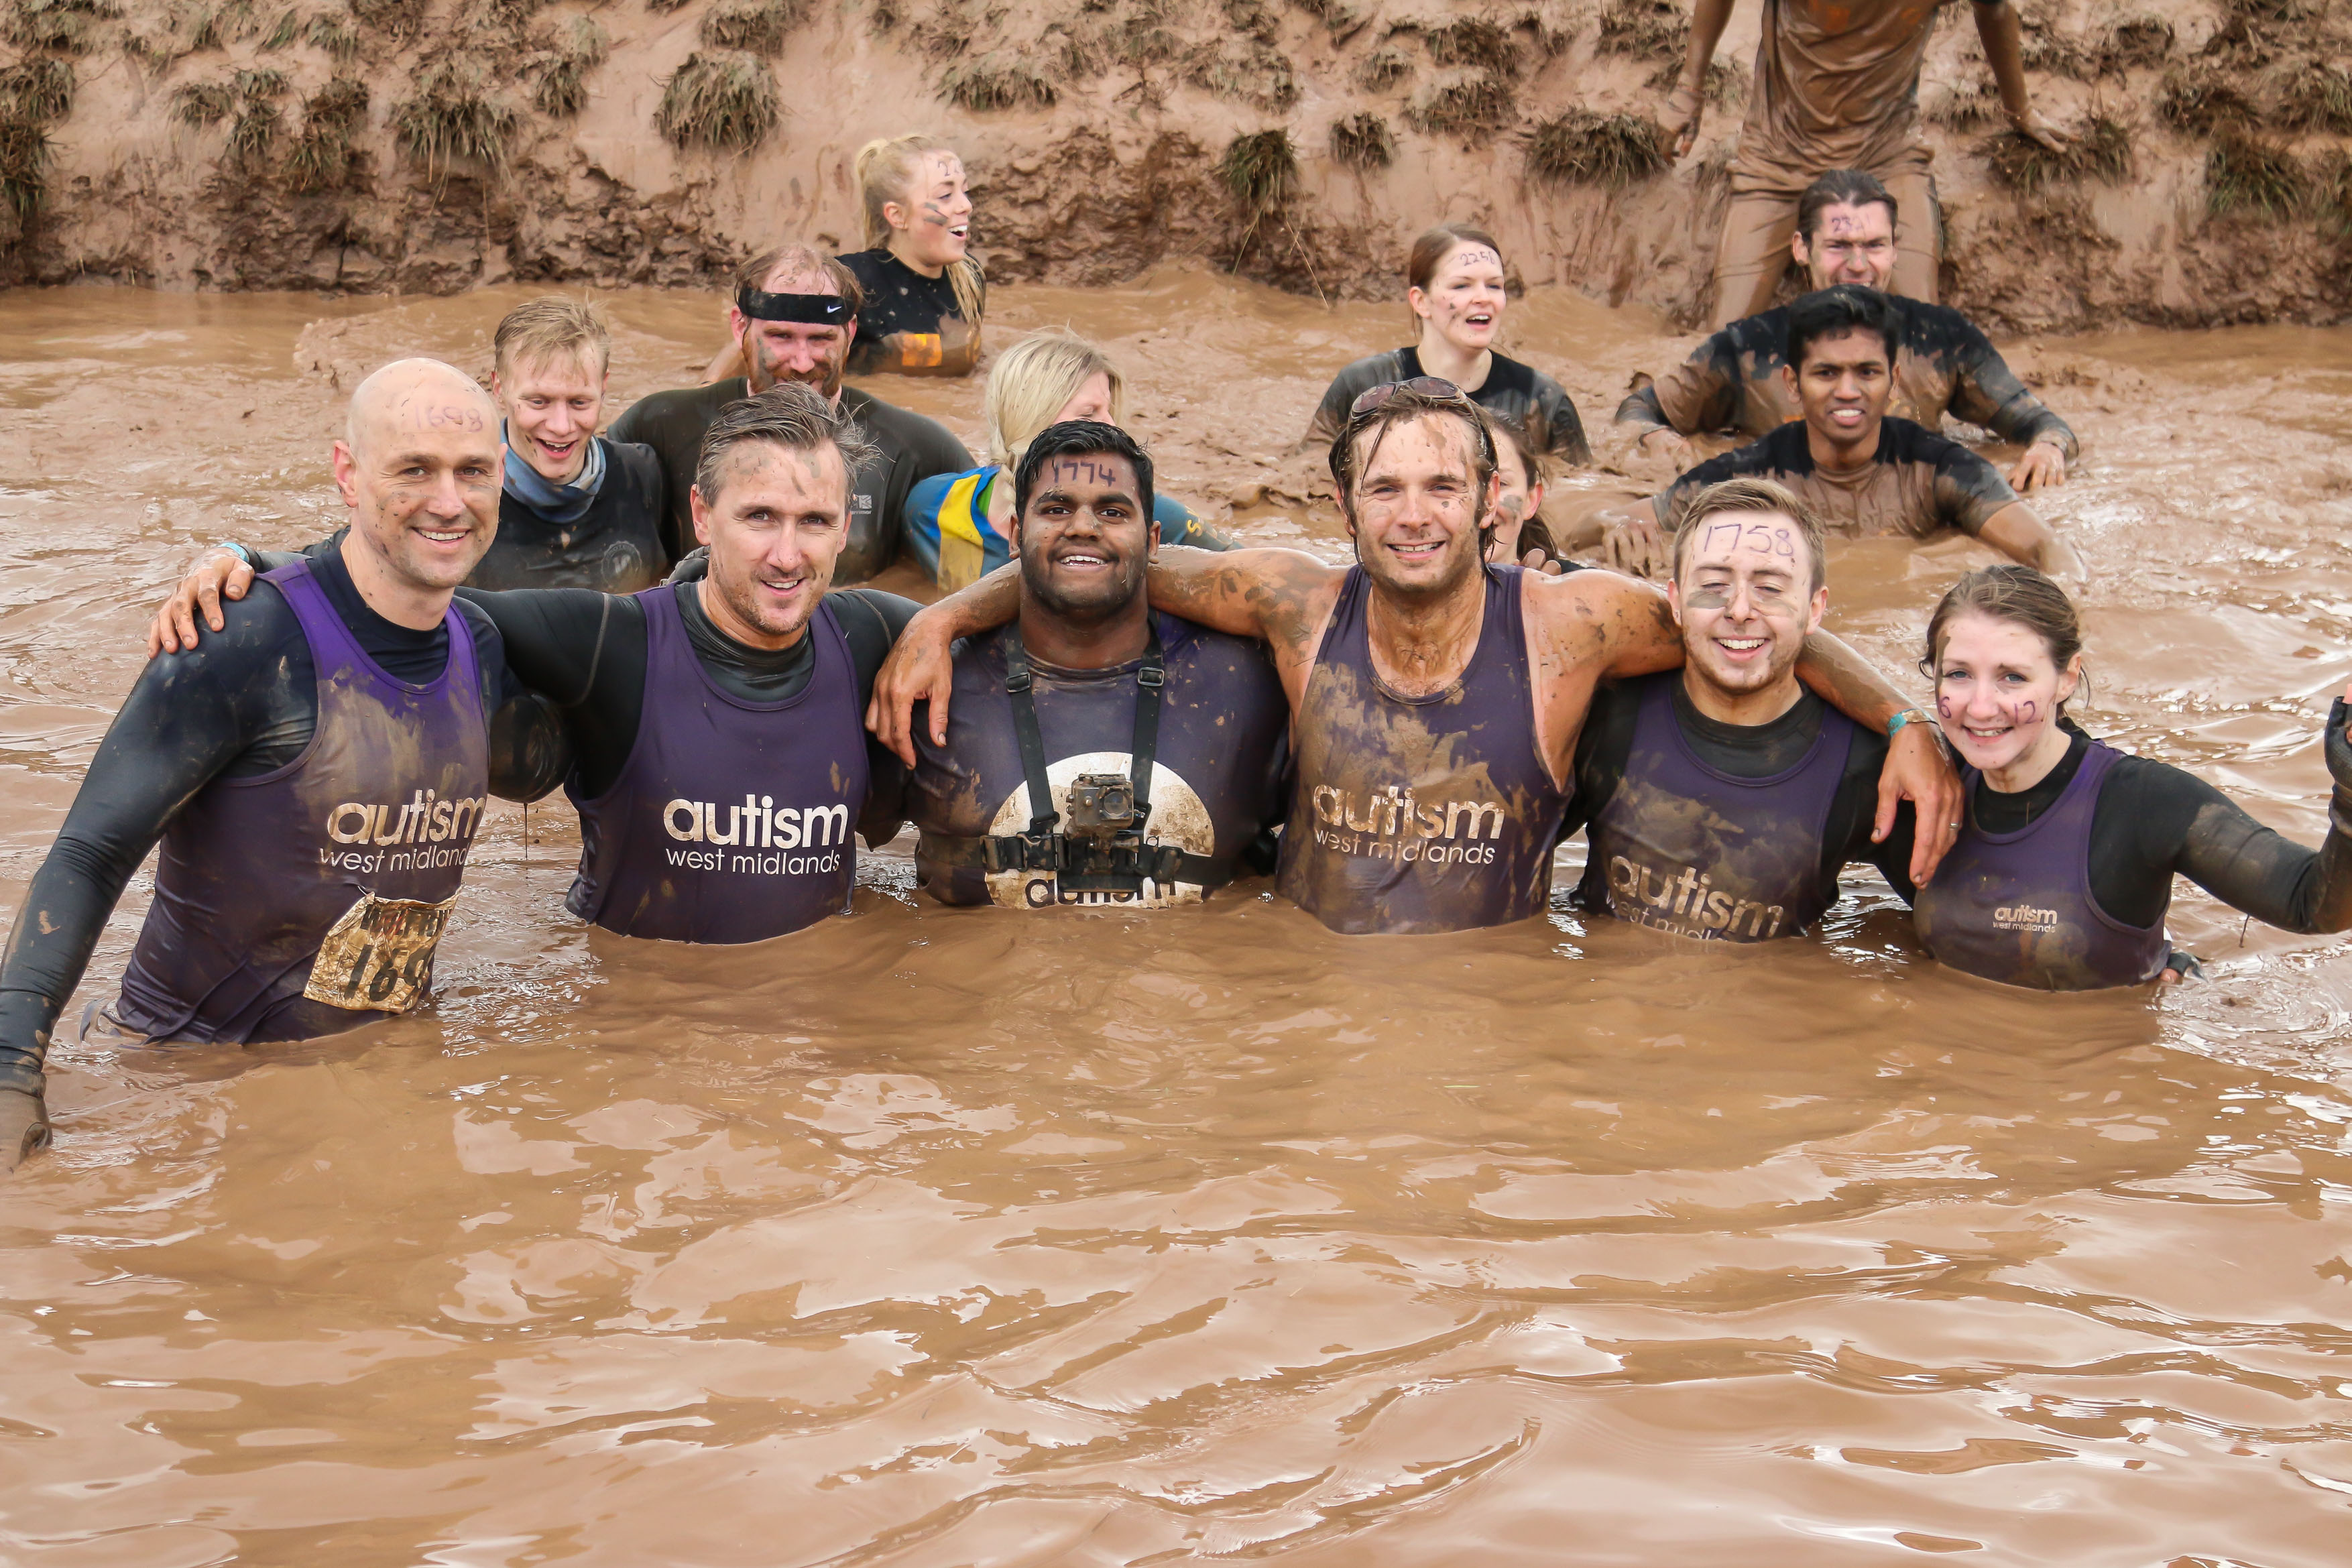 Get muddy with Team Superfast and help us raise much-needed funds for Autism West Midlands